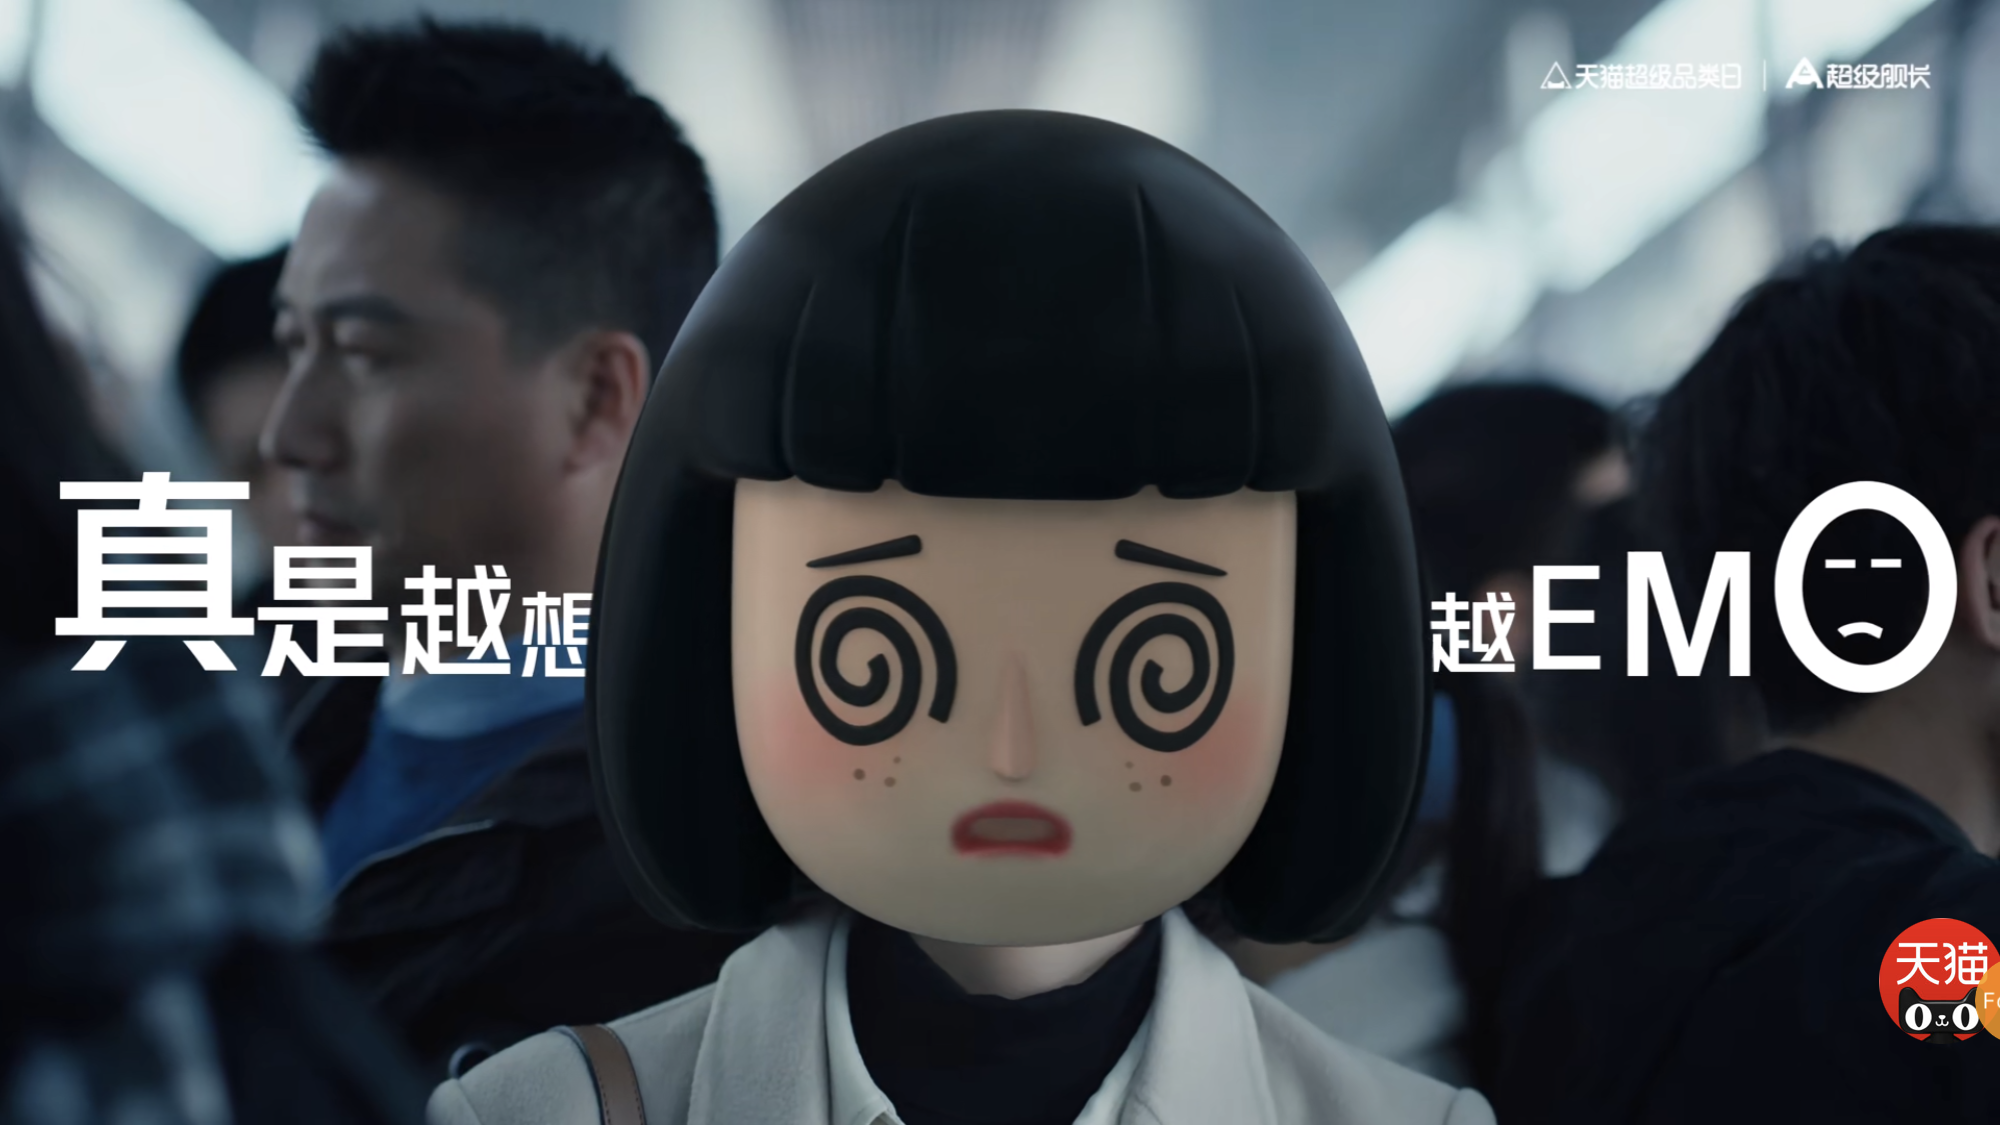 Introducing Chinese Youth’s Latest Buzzword — Emo